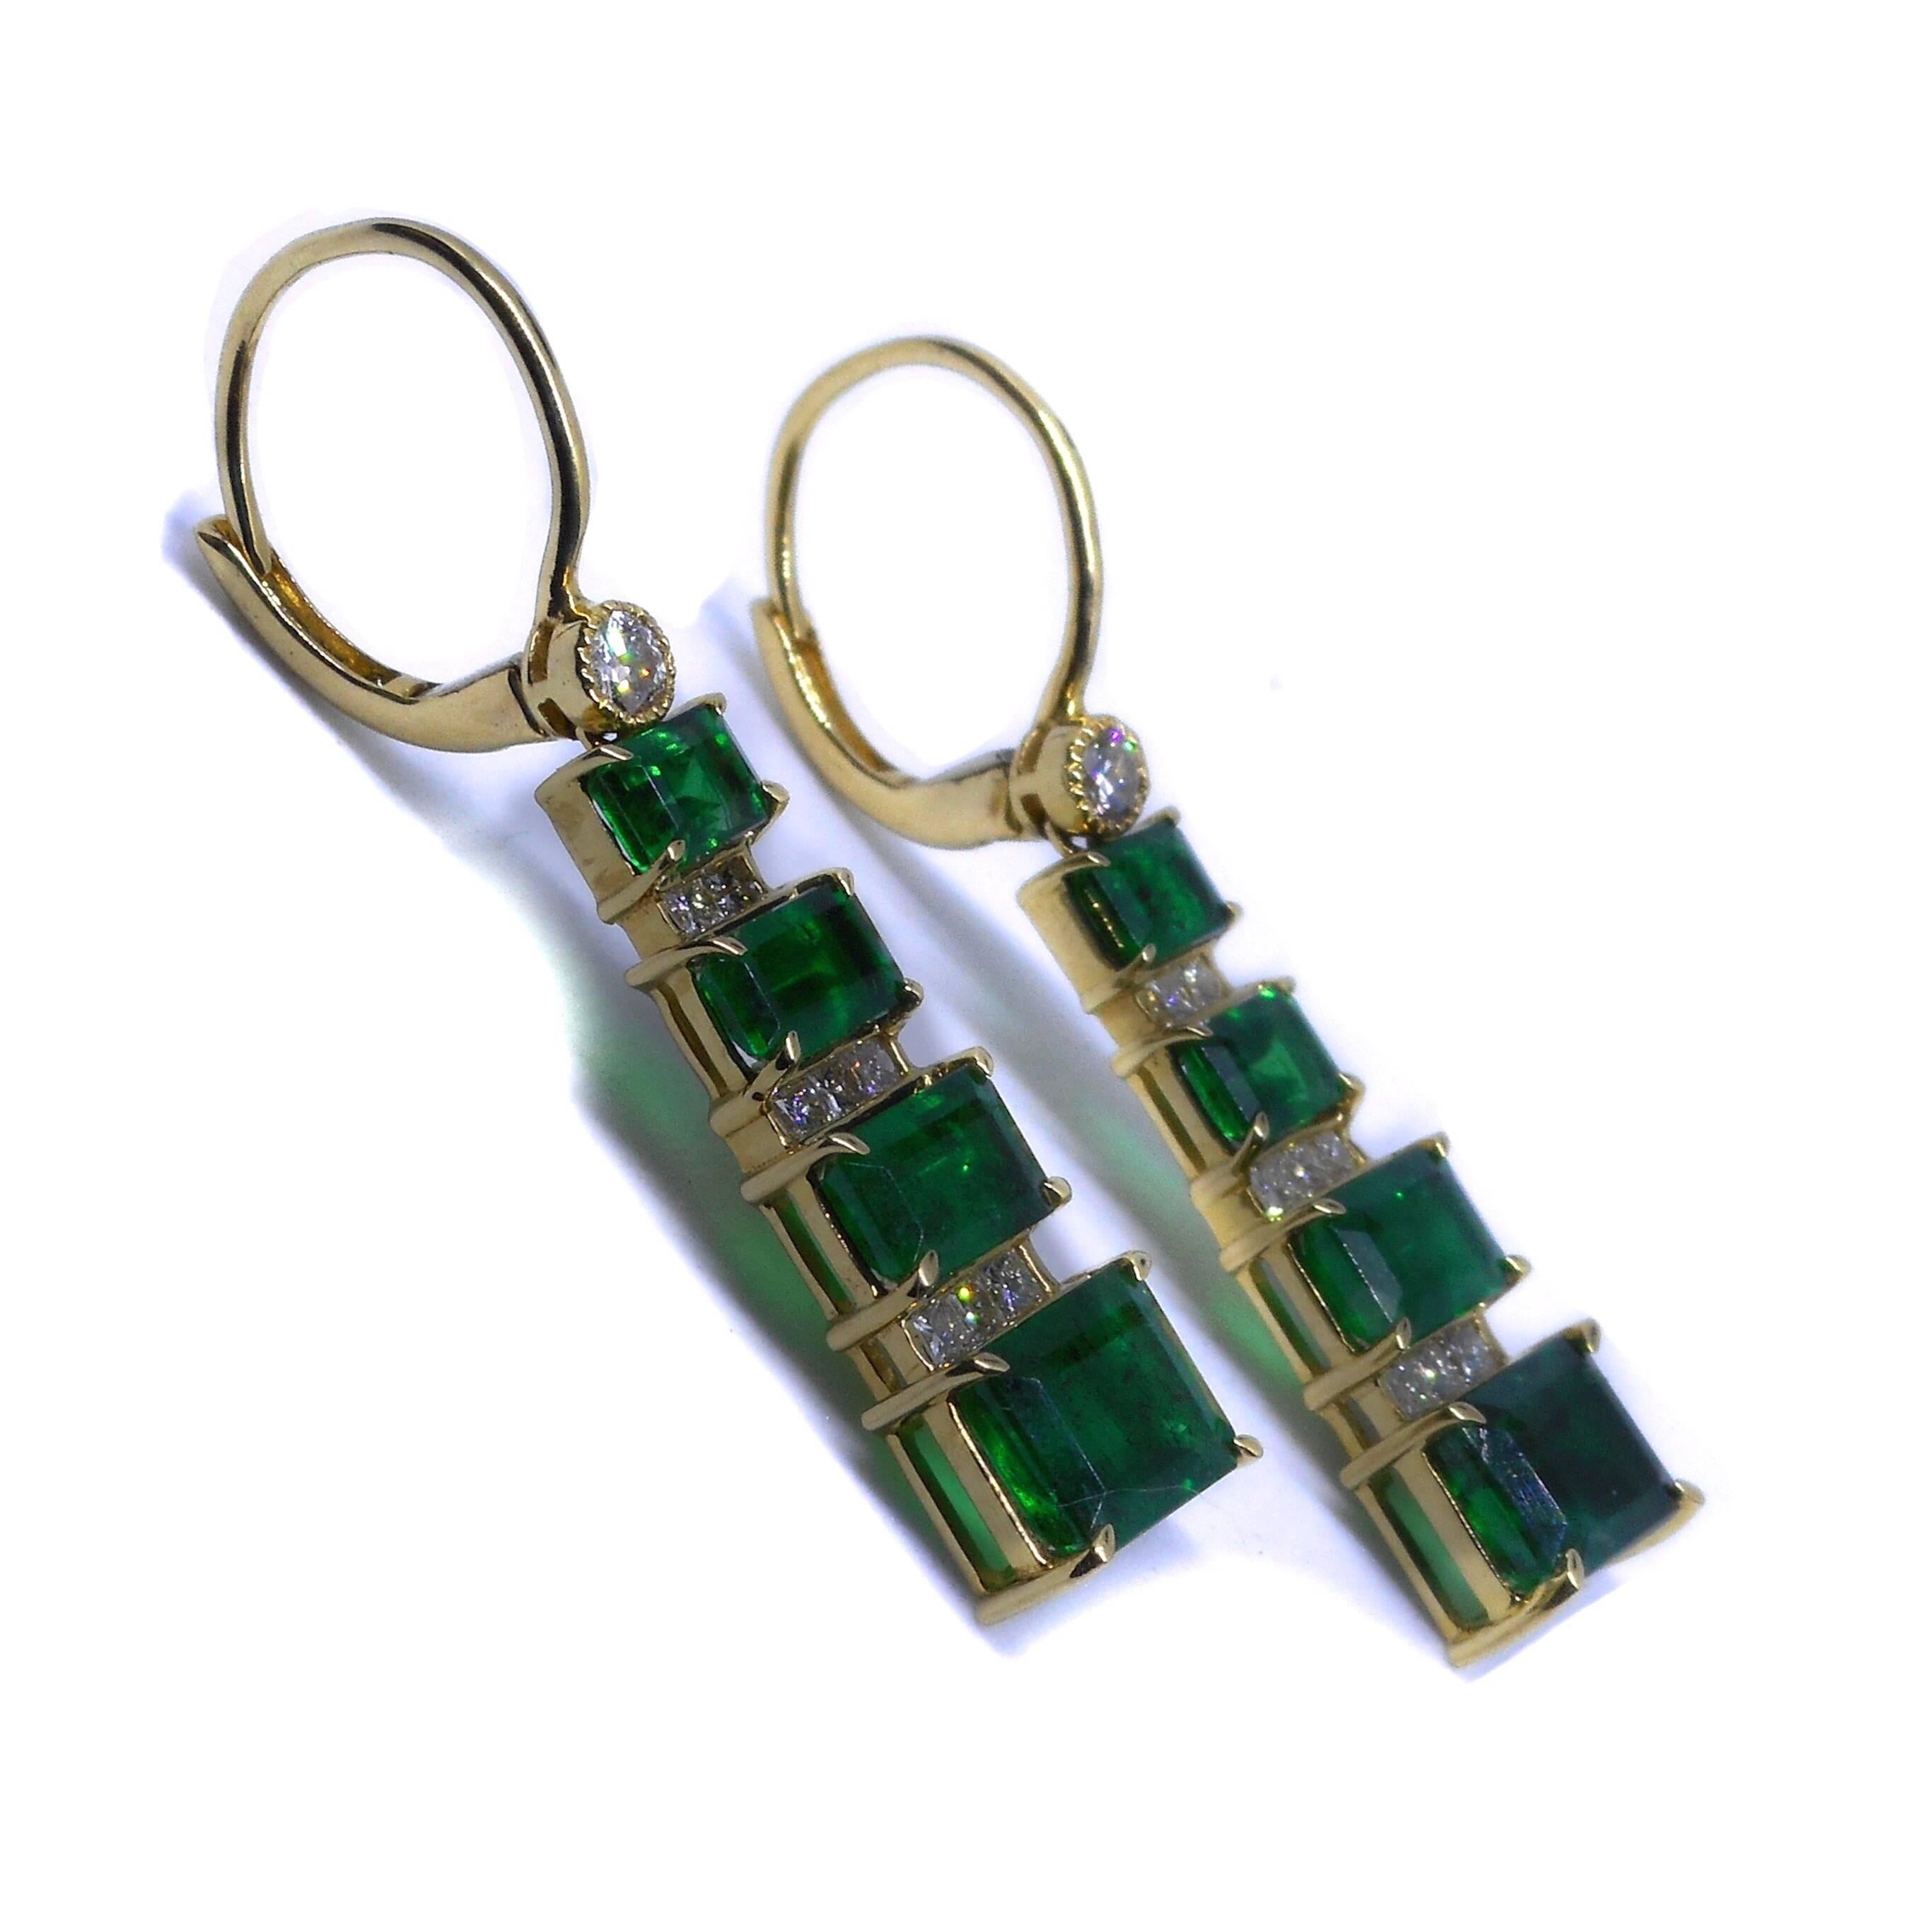 A PAIR OF 18CT GOLD EMERALD AND DIAMOND EARRINGS by Cartmer Jewellery
Certificate Valuation $18,860
Each a tapered drop set with 4 graduated step cut emeralds, adjacent to 8 princess cut diamonds, surmounted by a round brilliant cut diamond on a